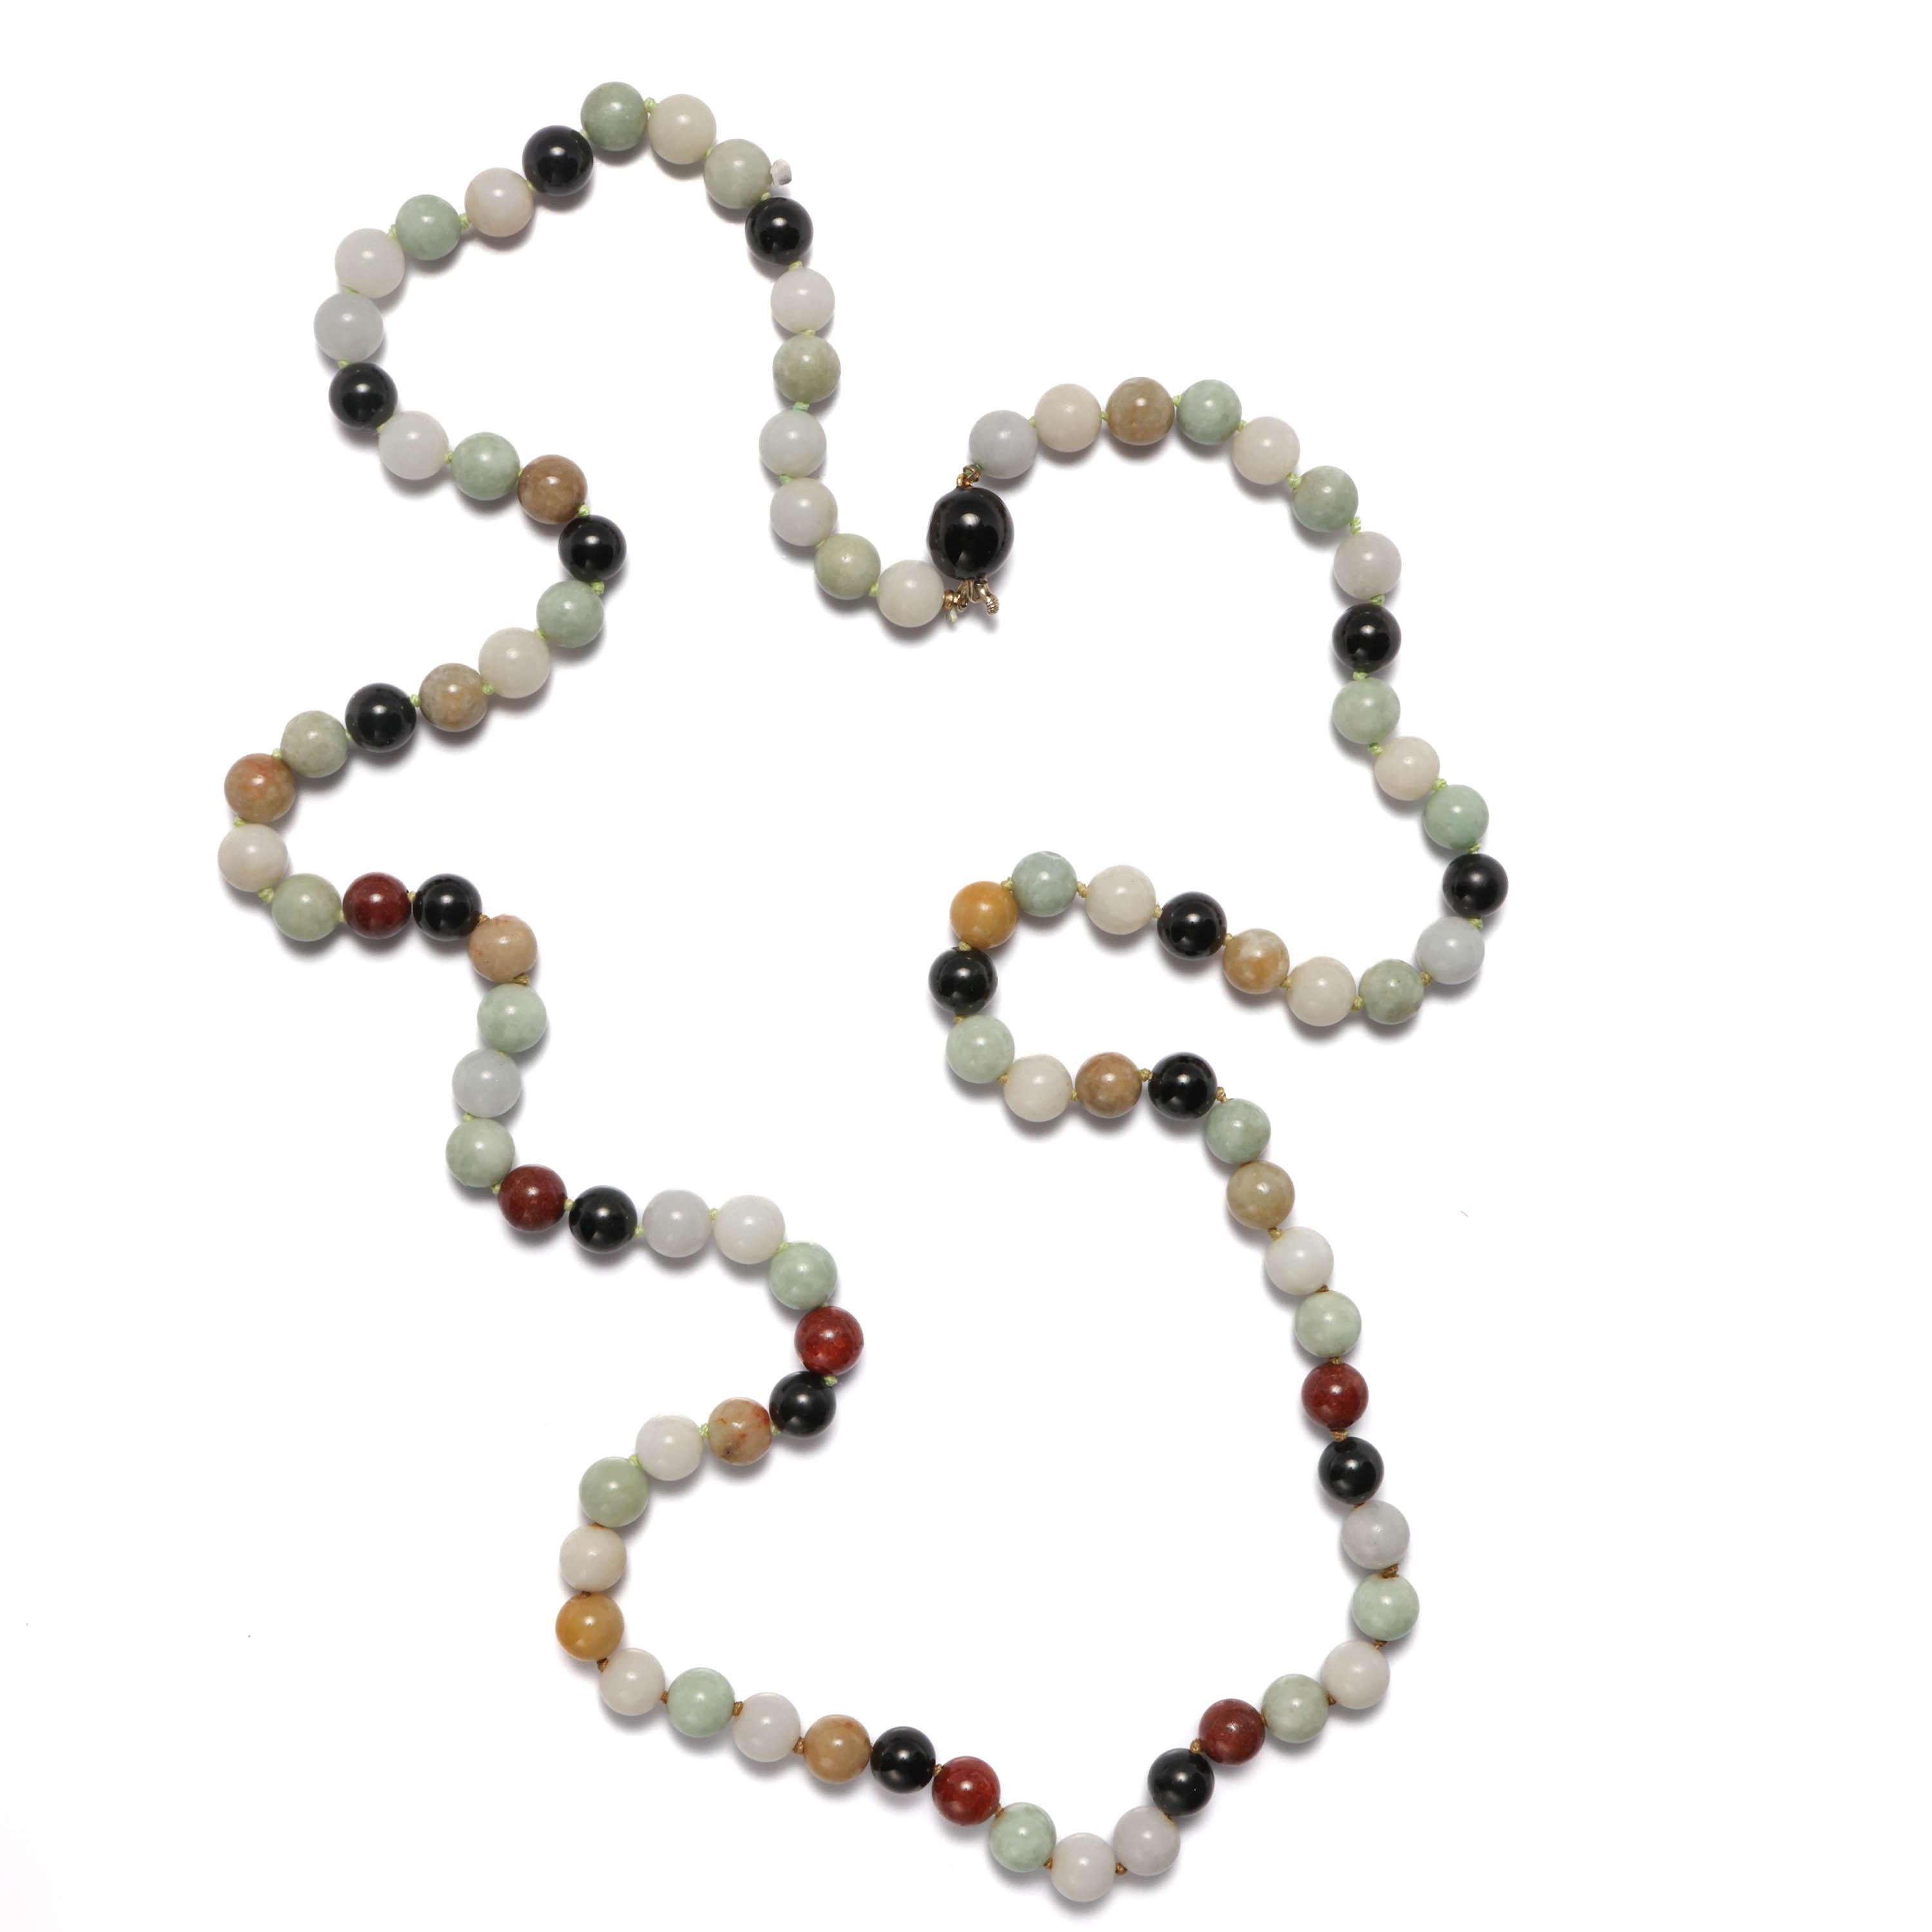 This sophisticated jade necklace features 76 9mm hand-carved round Burmese jadeite jade beads in a range of muted tones (the black beads are not jade). 

The 35